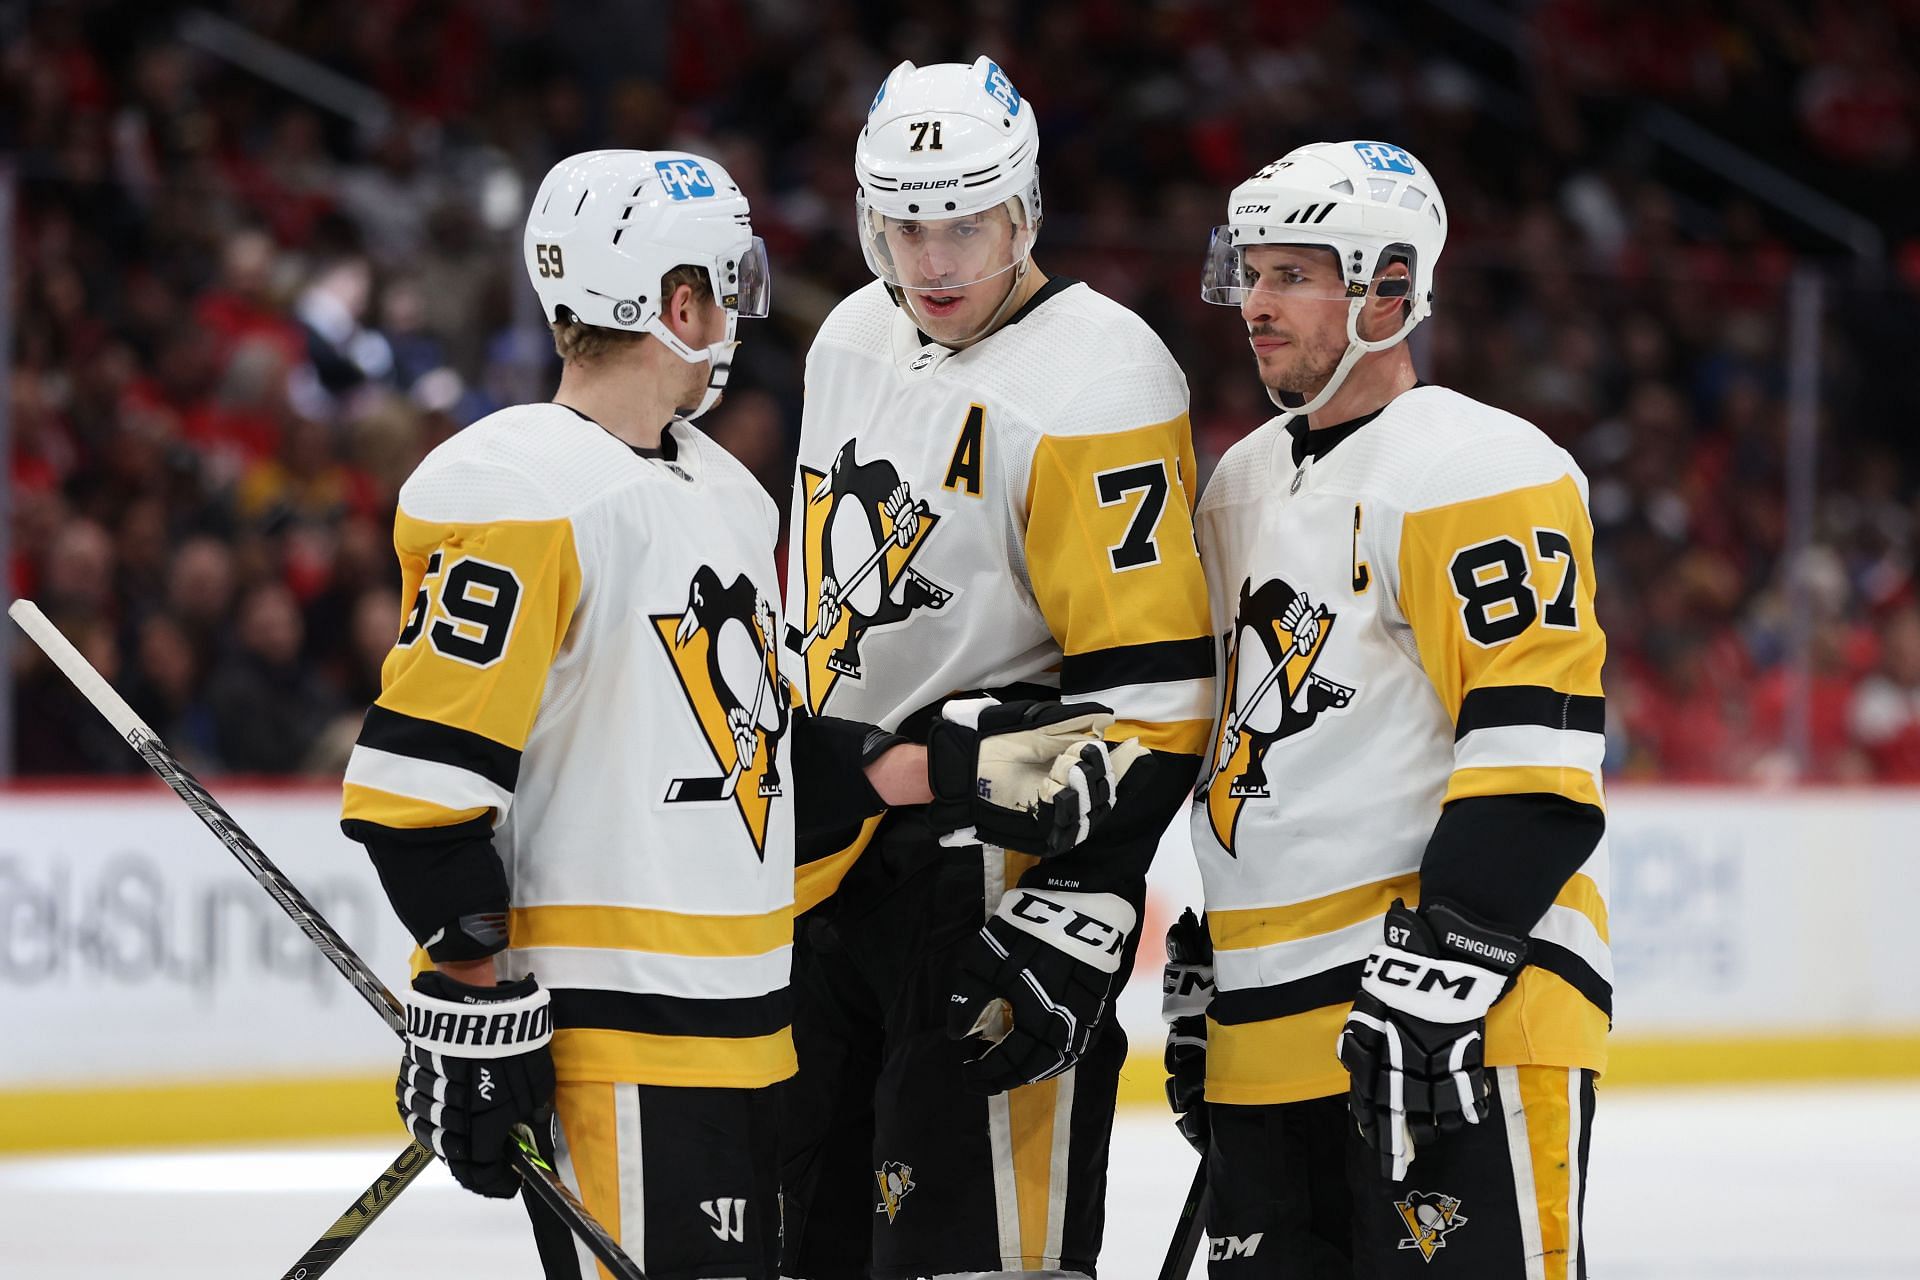 Jake Guentzel, Evgeni Malkin and Sidney Crosby of the Pittsburgh Penguins